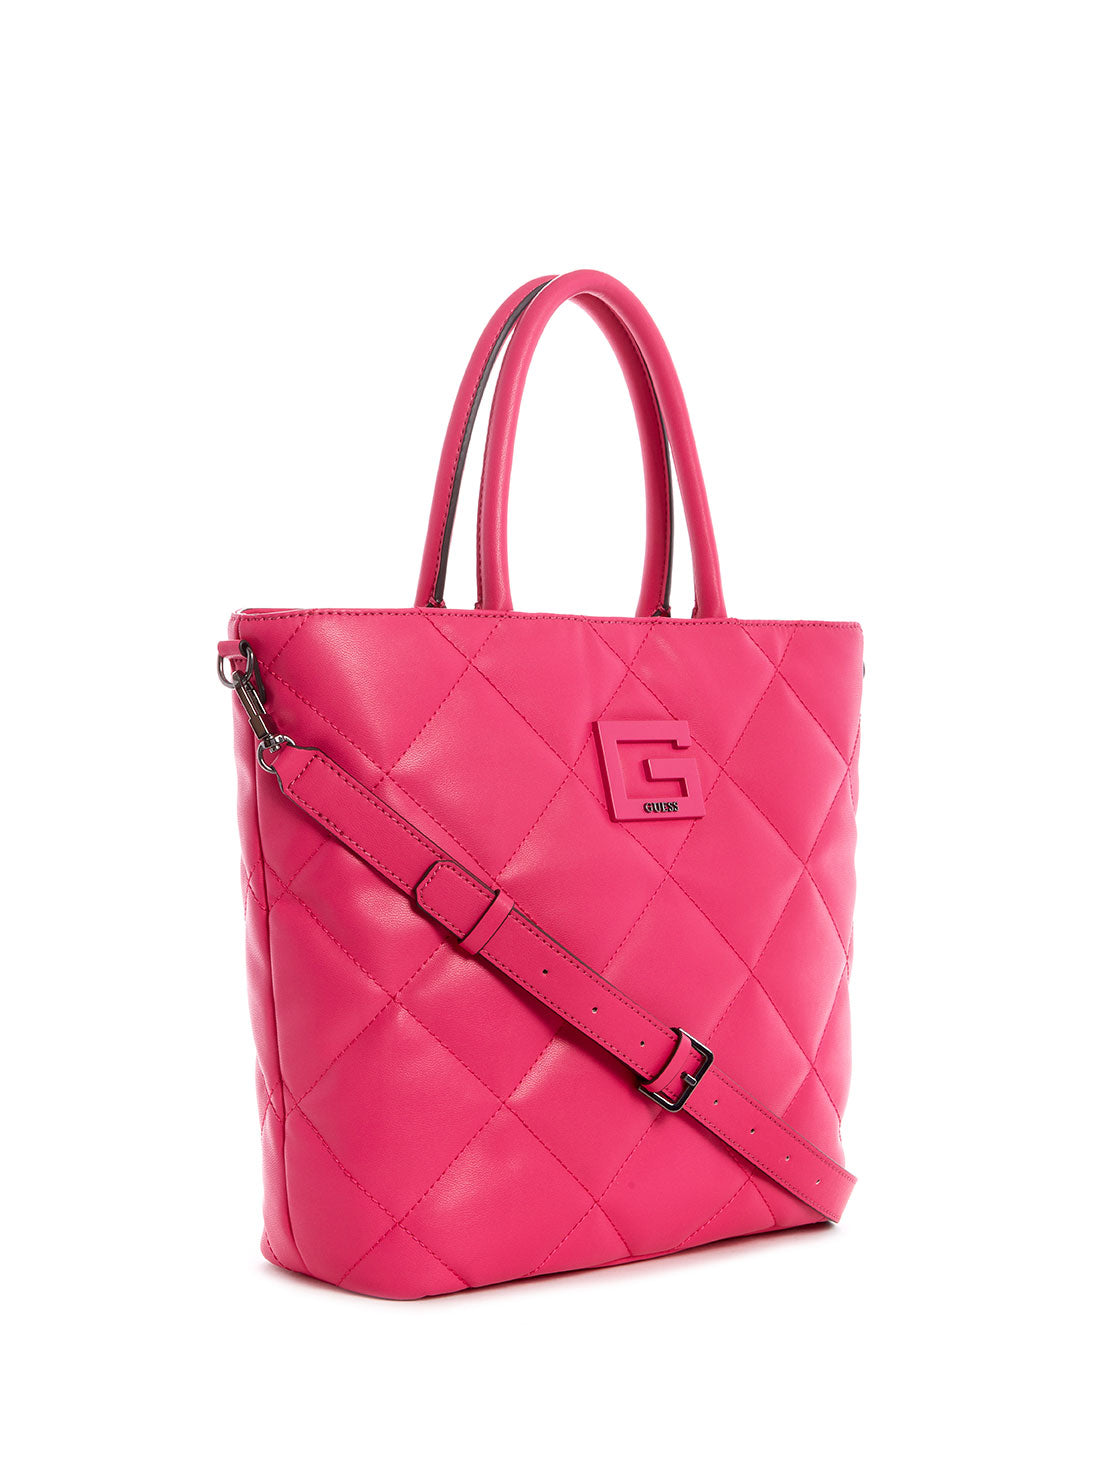 GUESS Womens Hot Pink Quilted Brightside Tote Bag QM758023 Front Side View